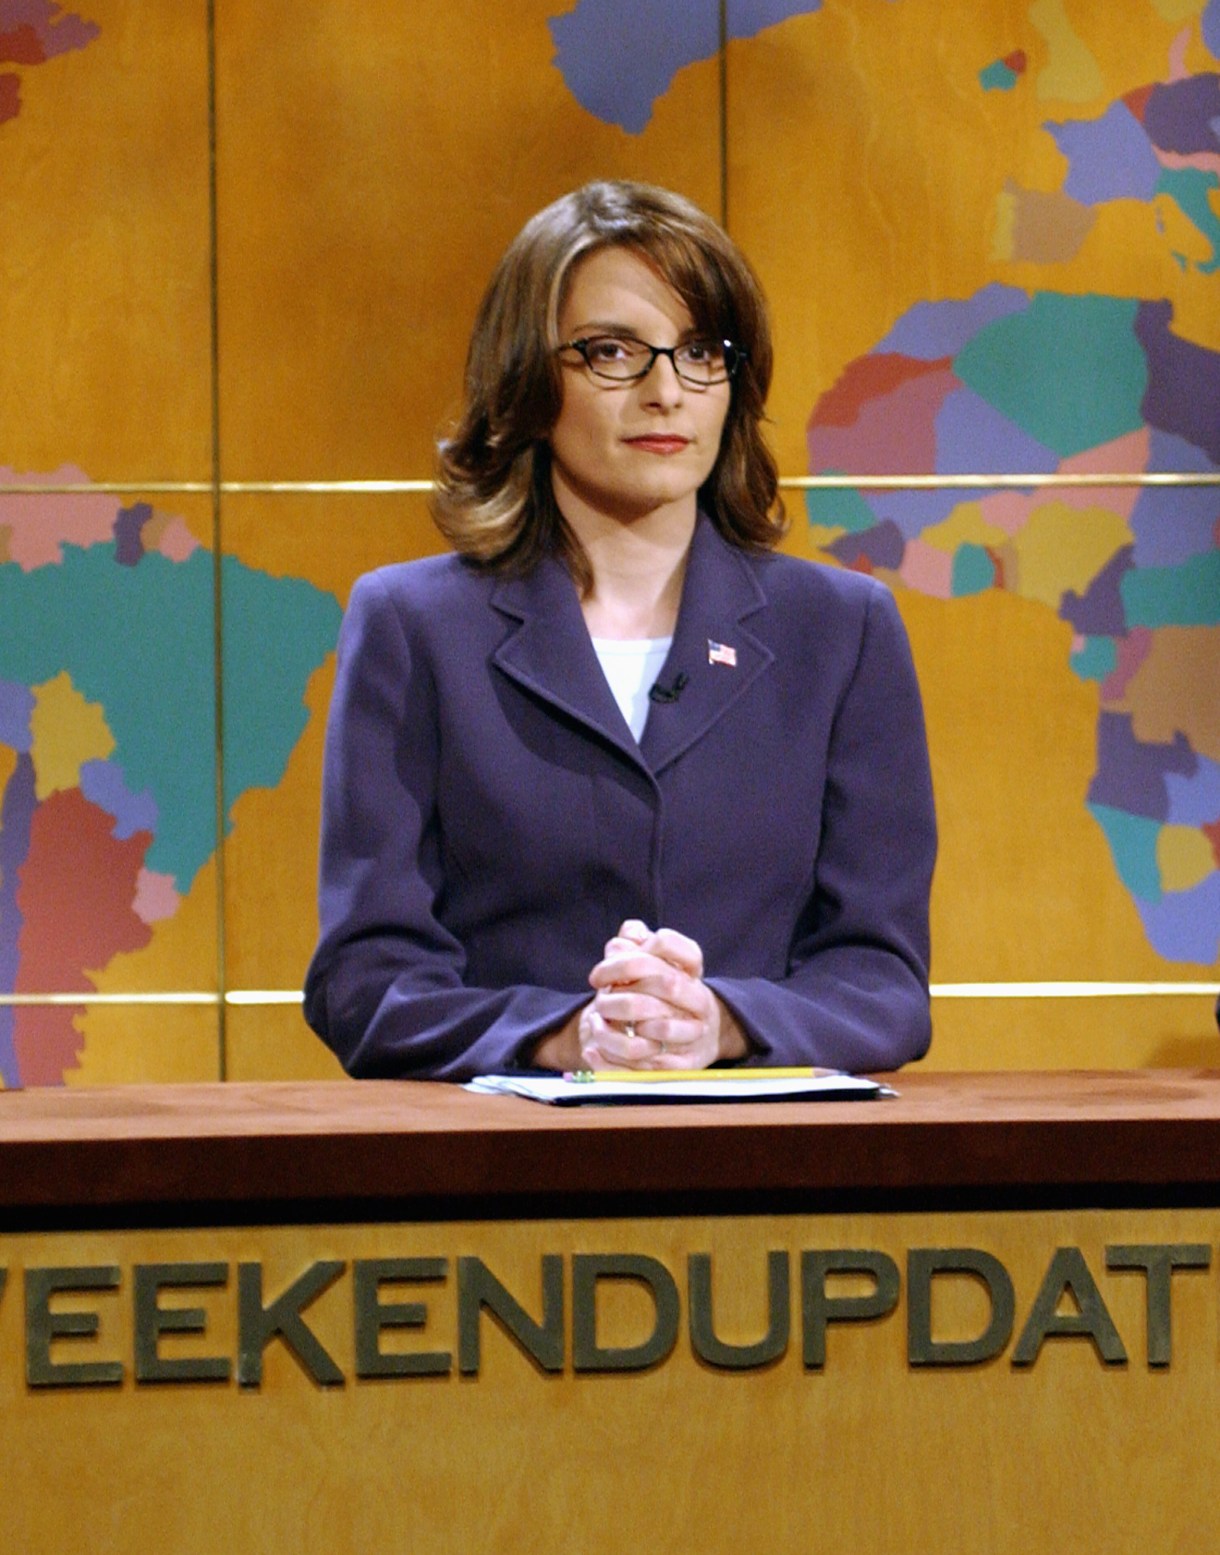 SATURDAY NIGHT LIVE -- Episode 6 -- Air Date 11/17/2001 -- Pictured: Tina Fey during "Weekend Update" on Novemeber 17, 2001  